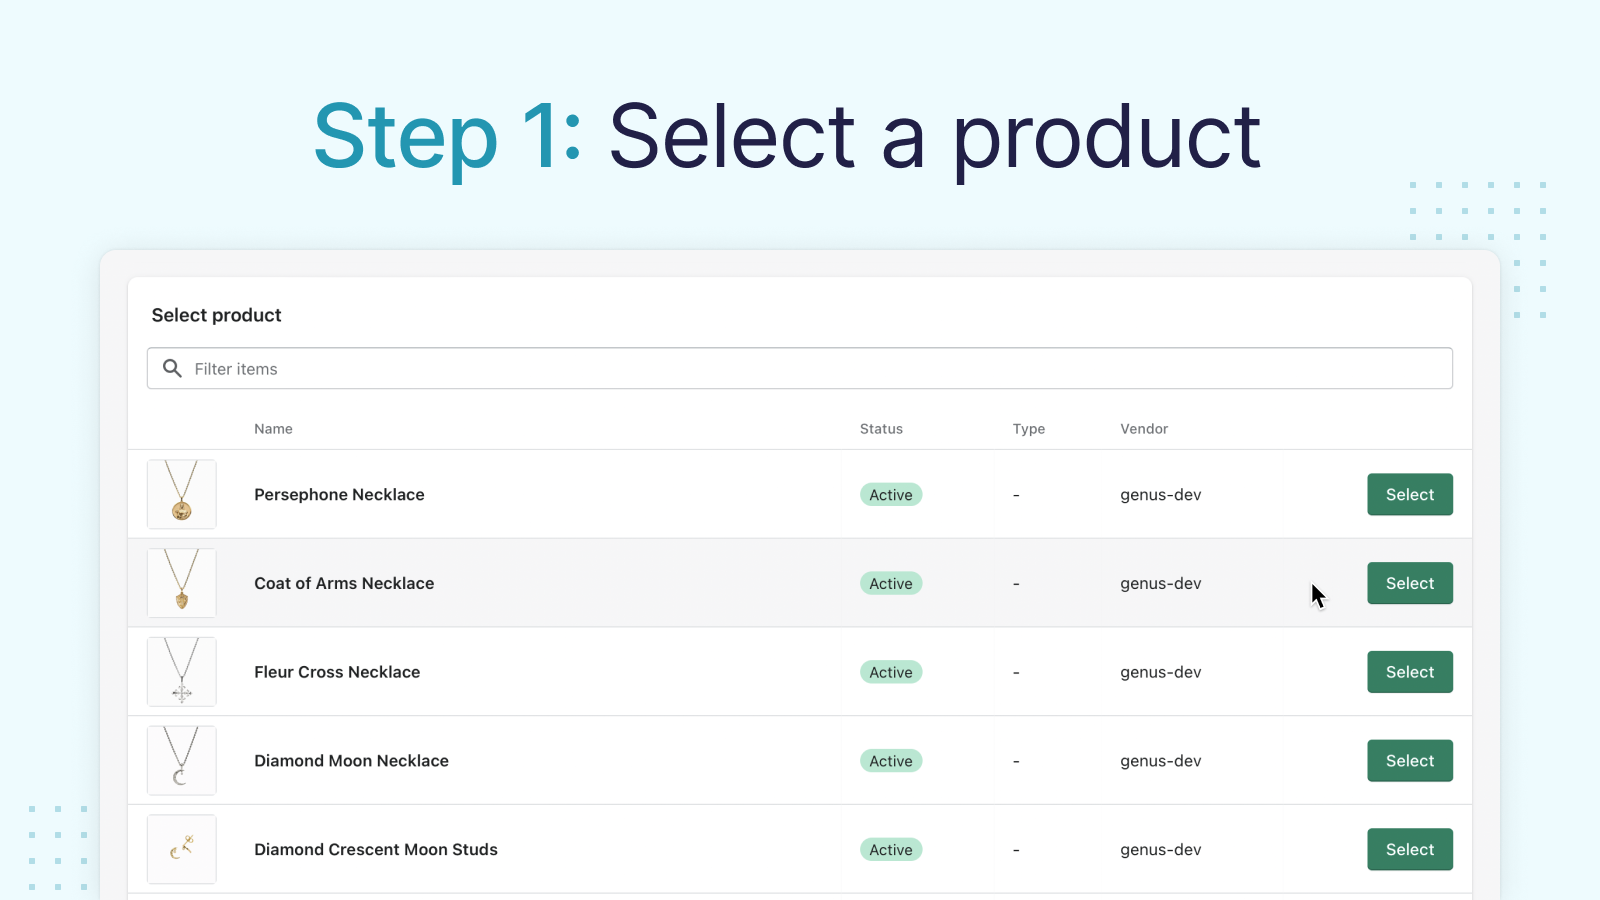 Step 1: Select a product